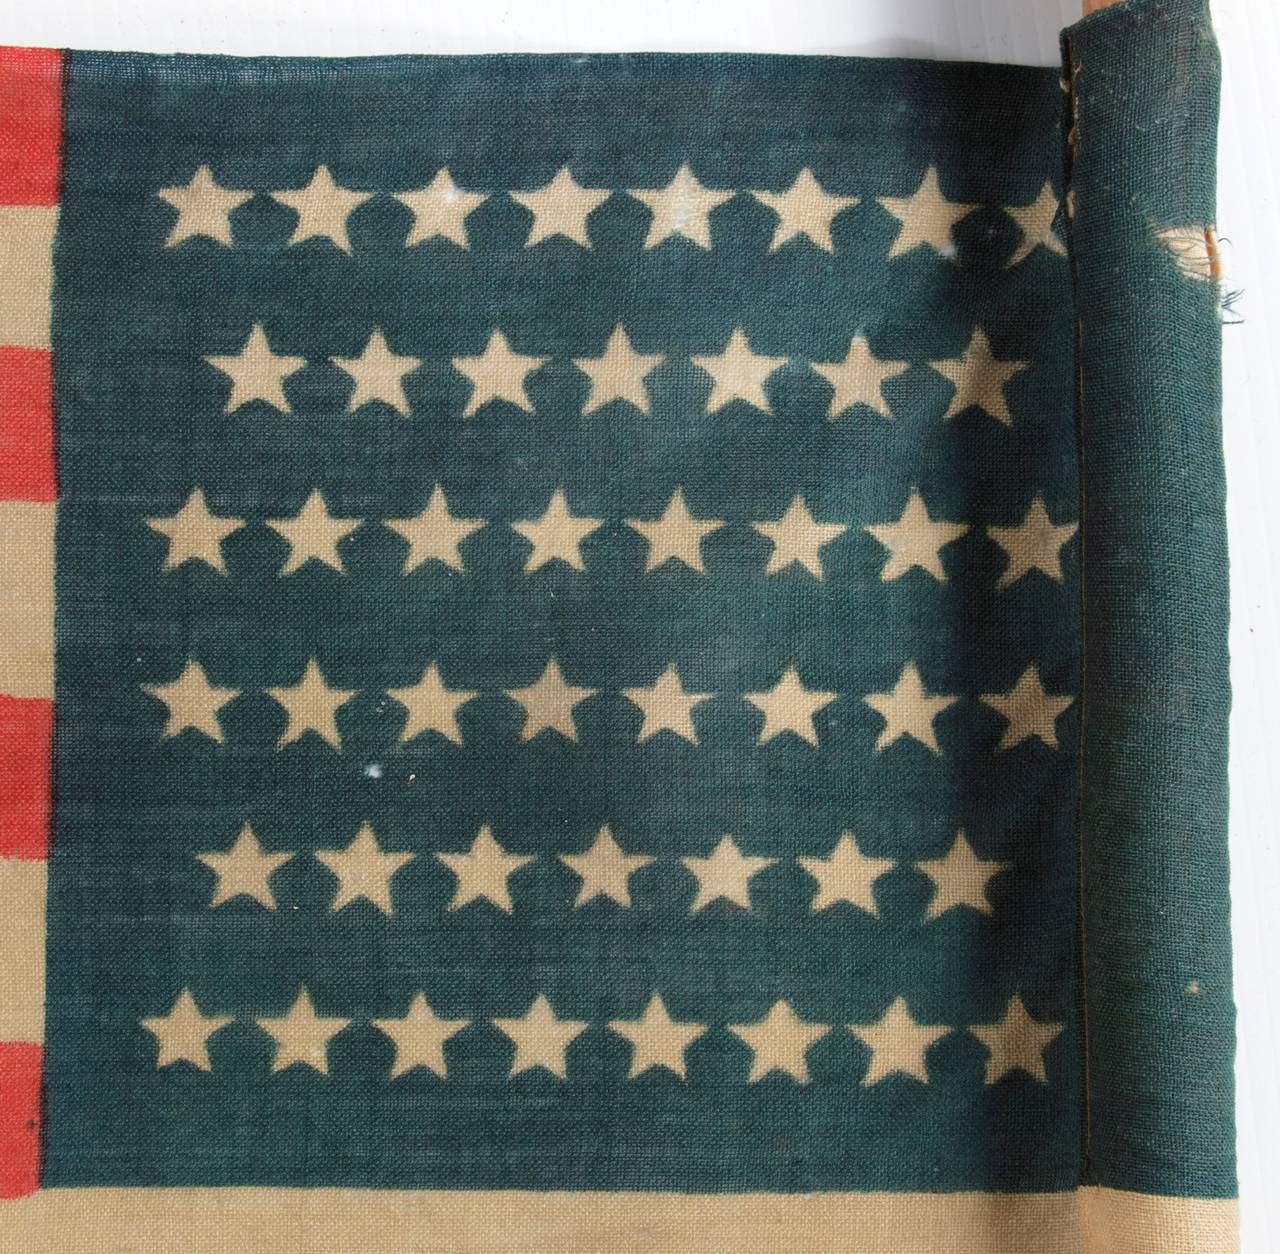 American Classical 46 Star U.S Military Camp Color, Press-Dyed Wool Flag